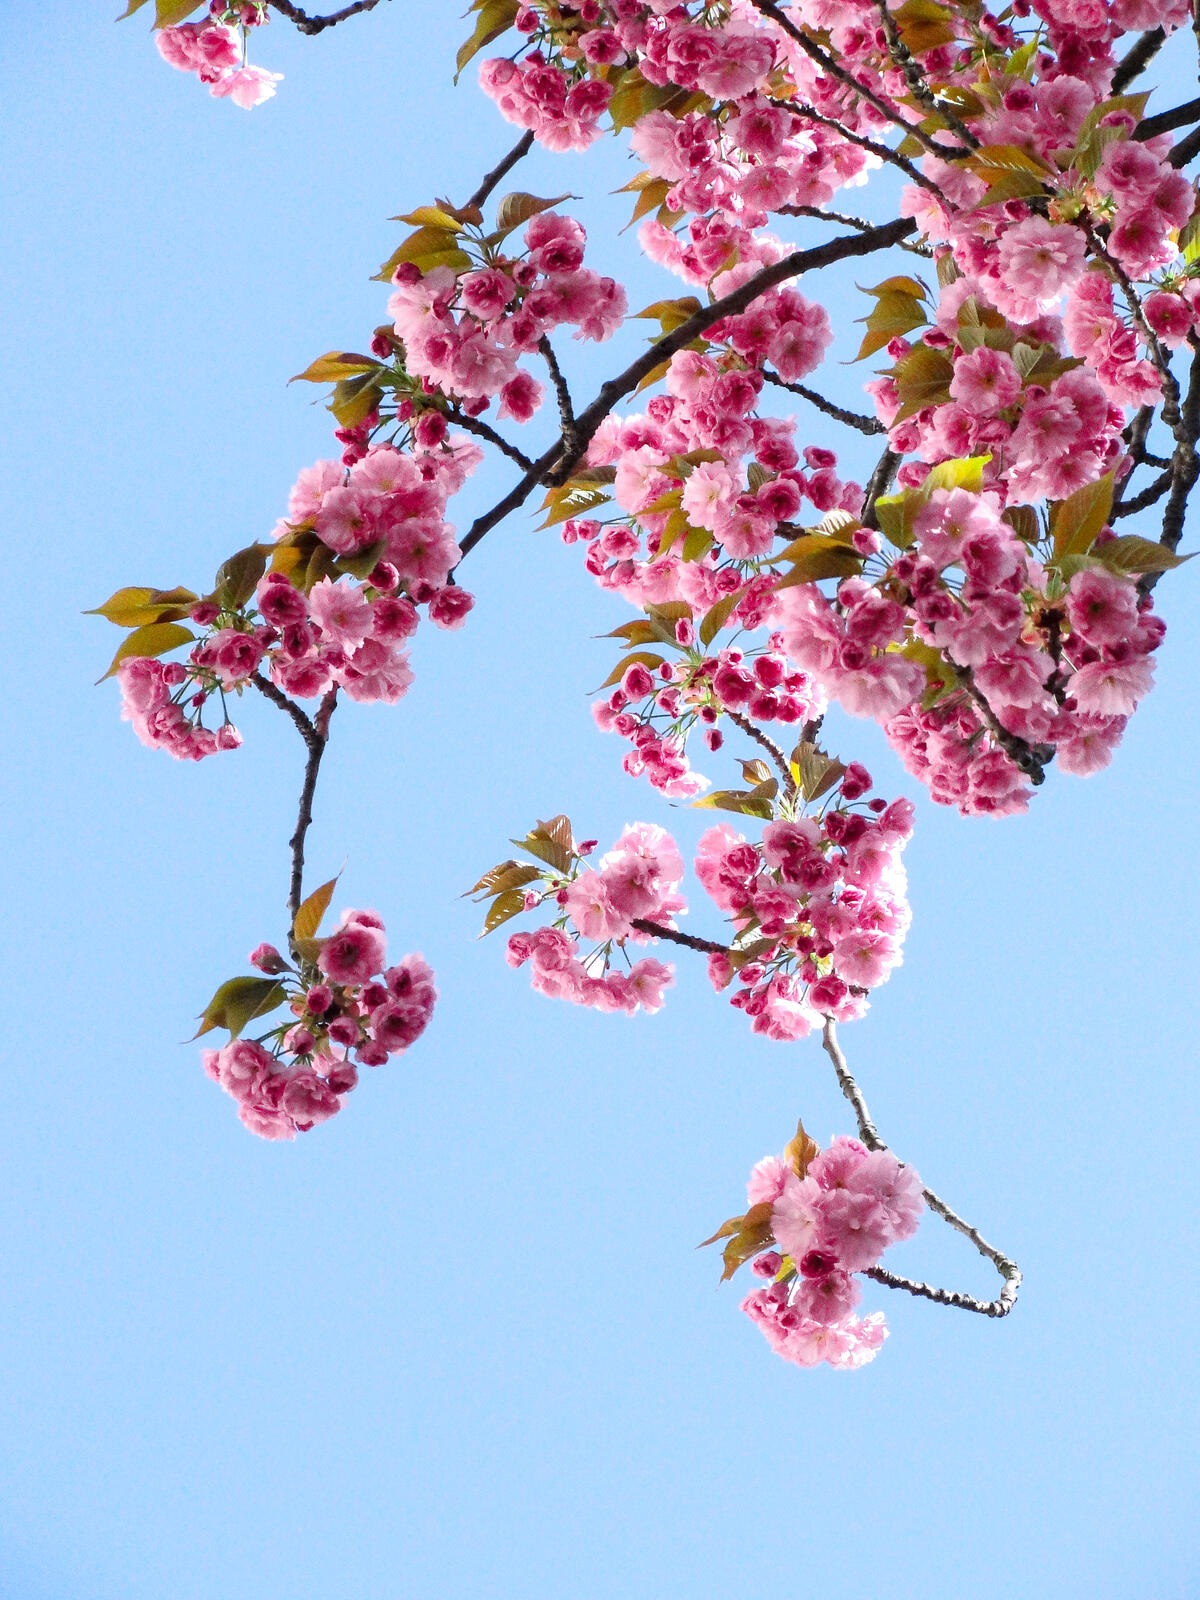 Pink flowers on a tree branch on a blue background